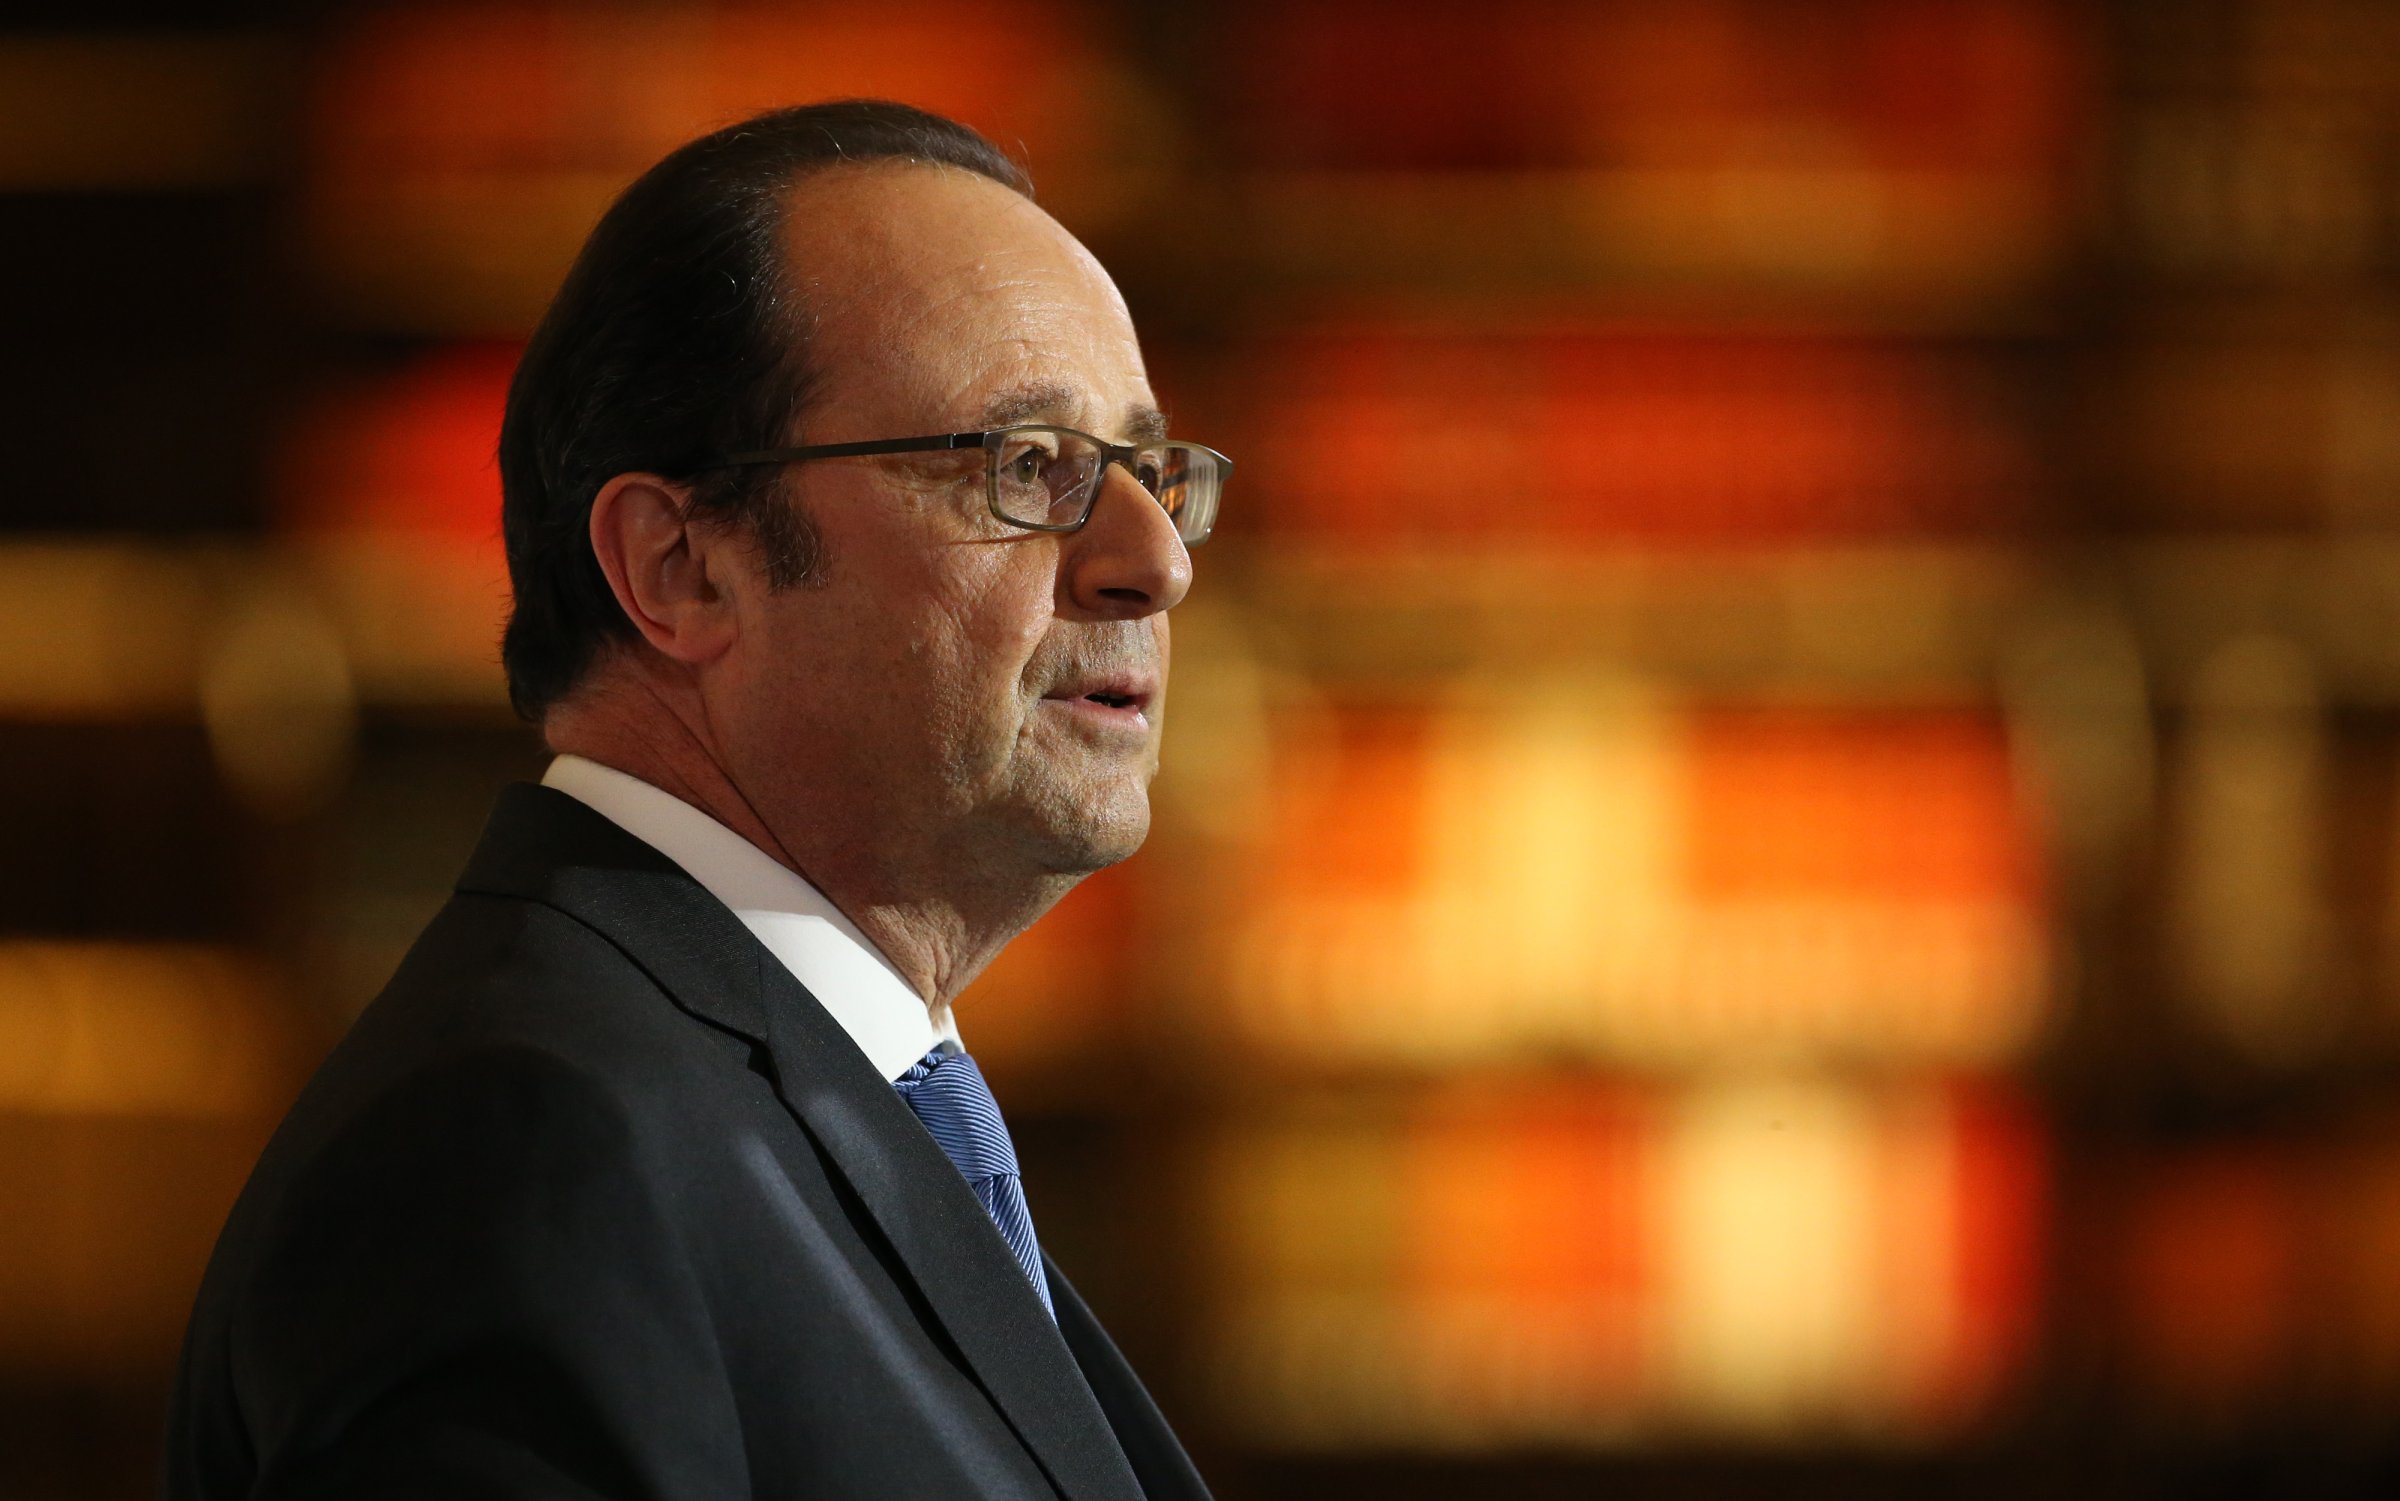 French President Francois Hollande Inaugurates La Bibliotheque Nationale De France -BNF- After Its Renovation In Paris